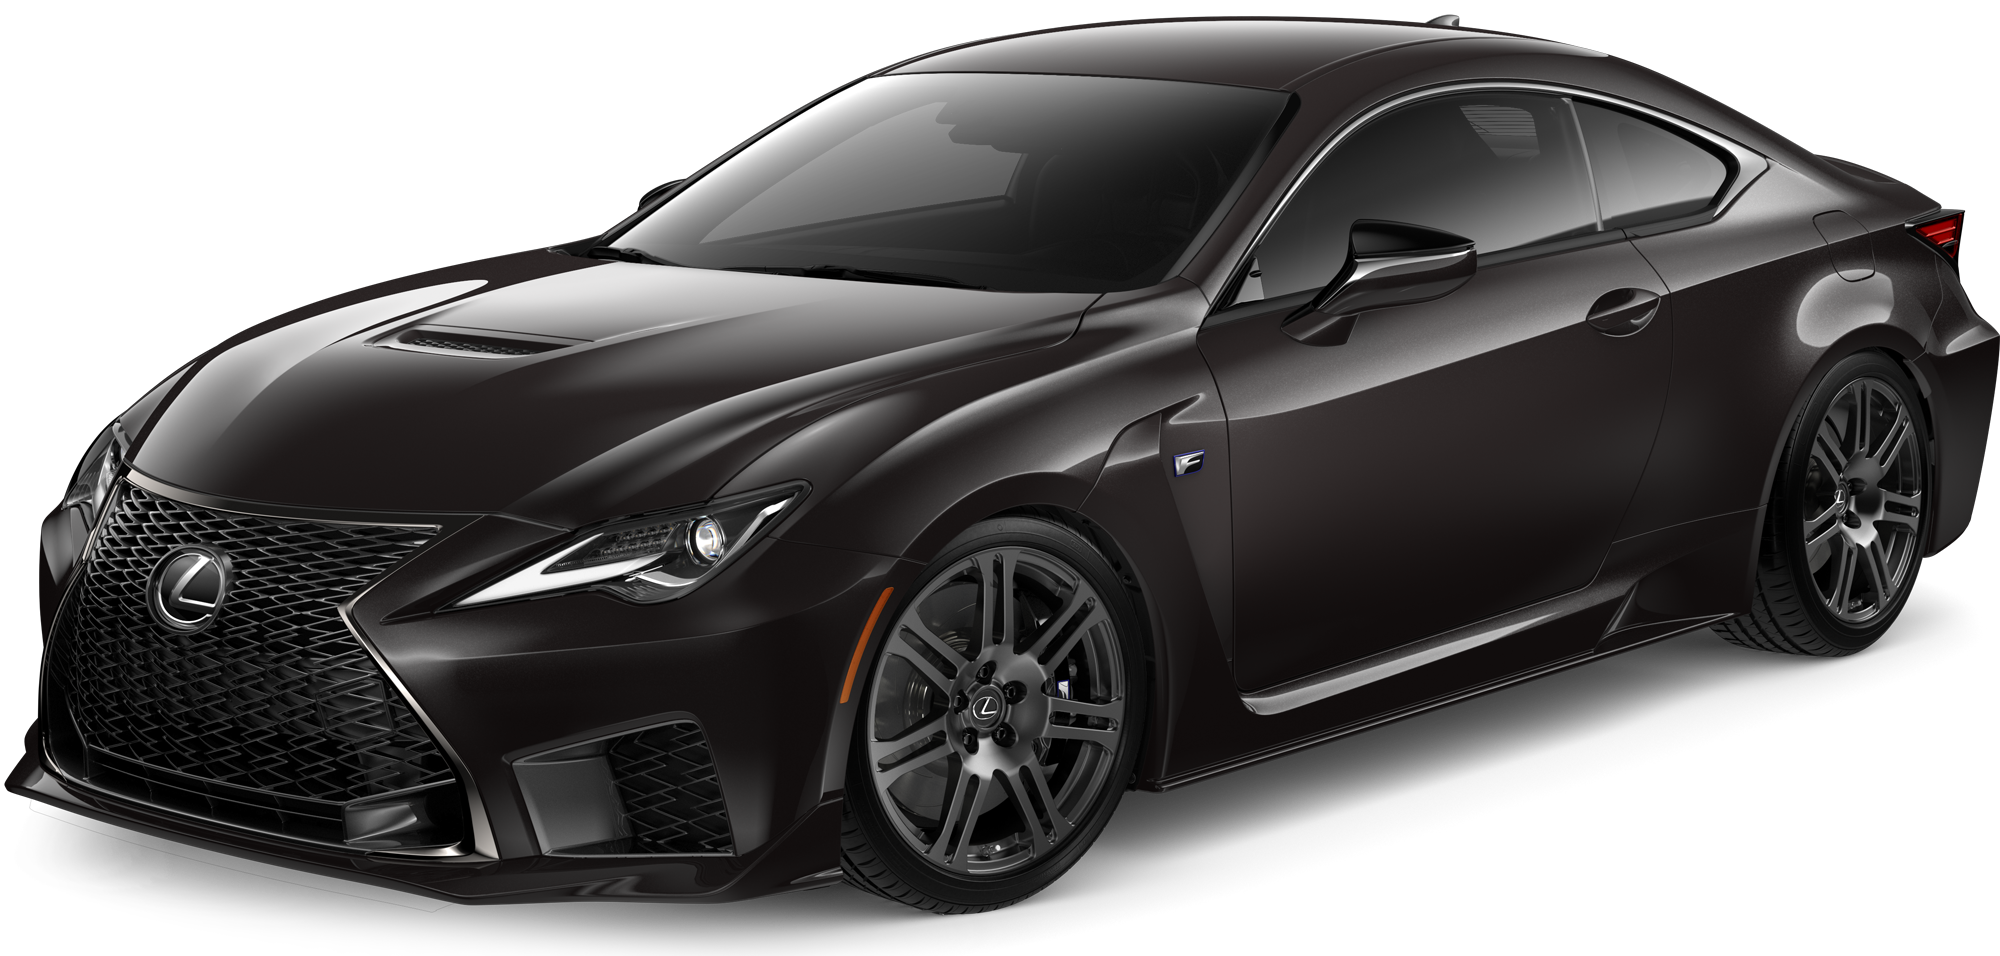 2019 Lexus RC F Incentives, Specials & Offers in Plano TX